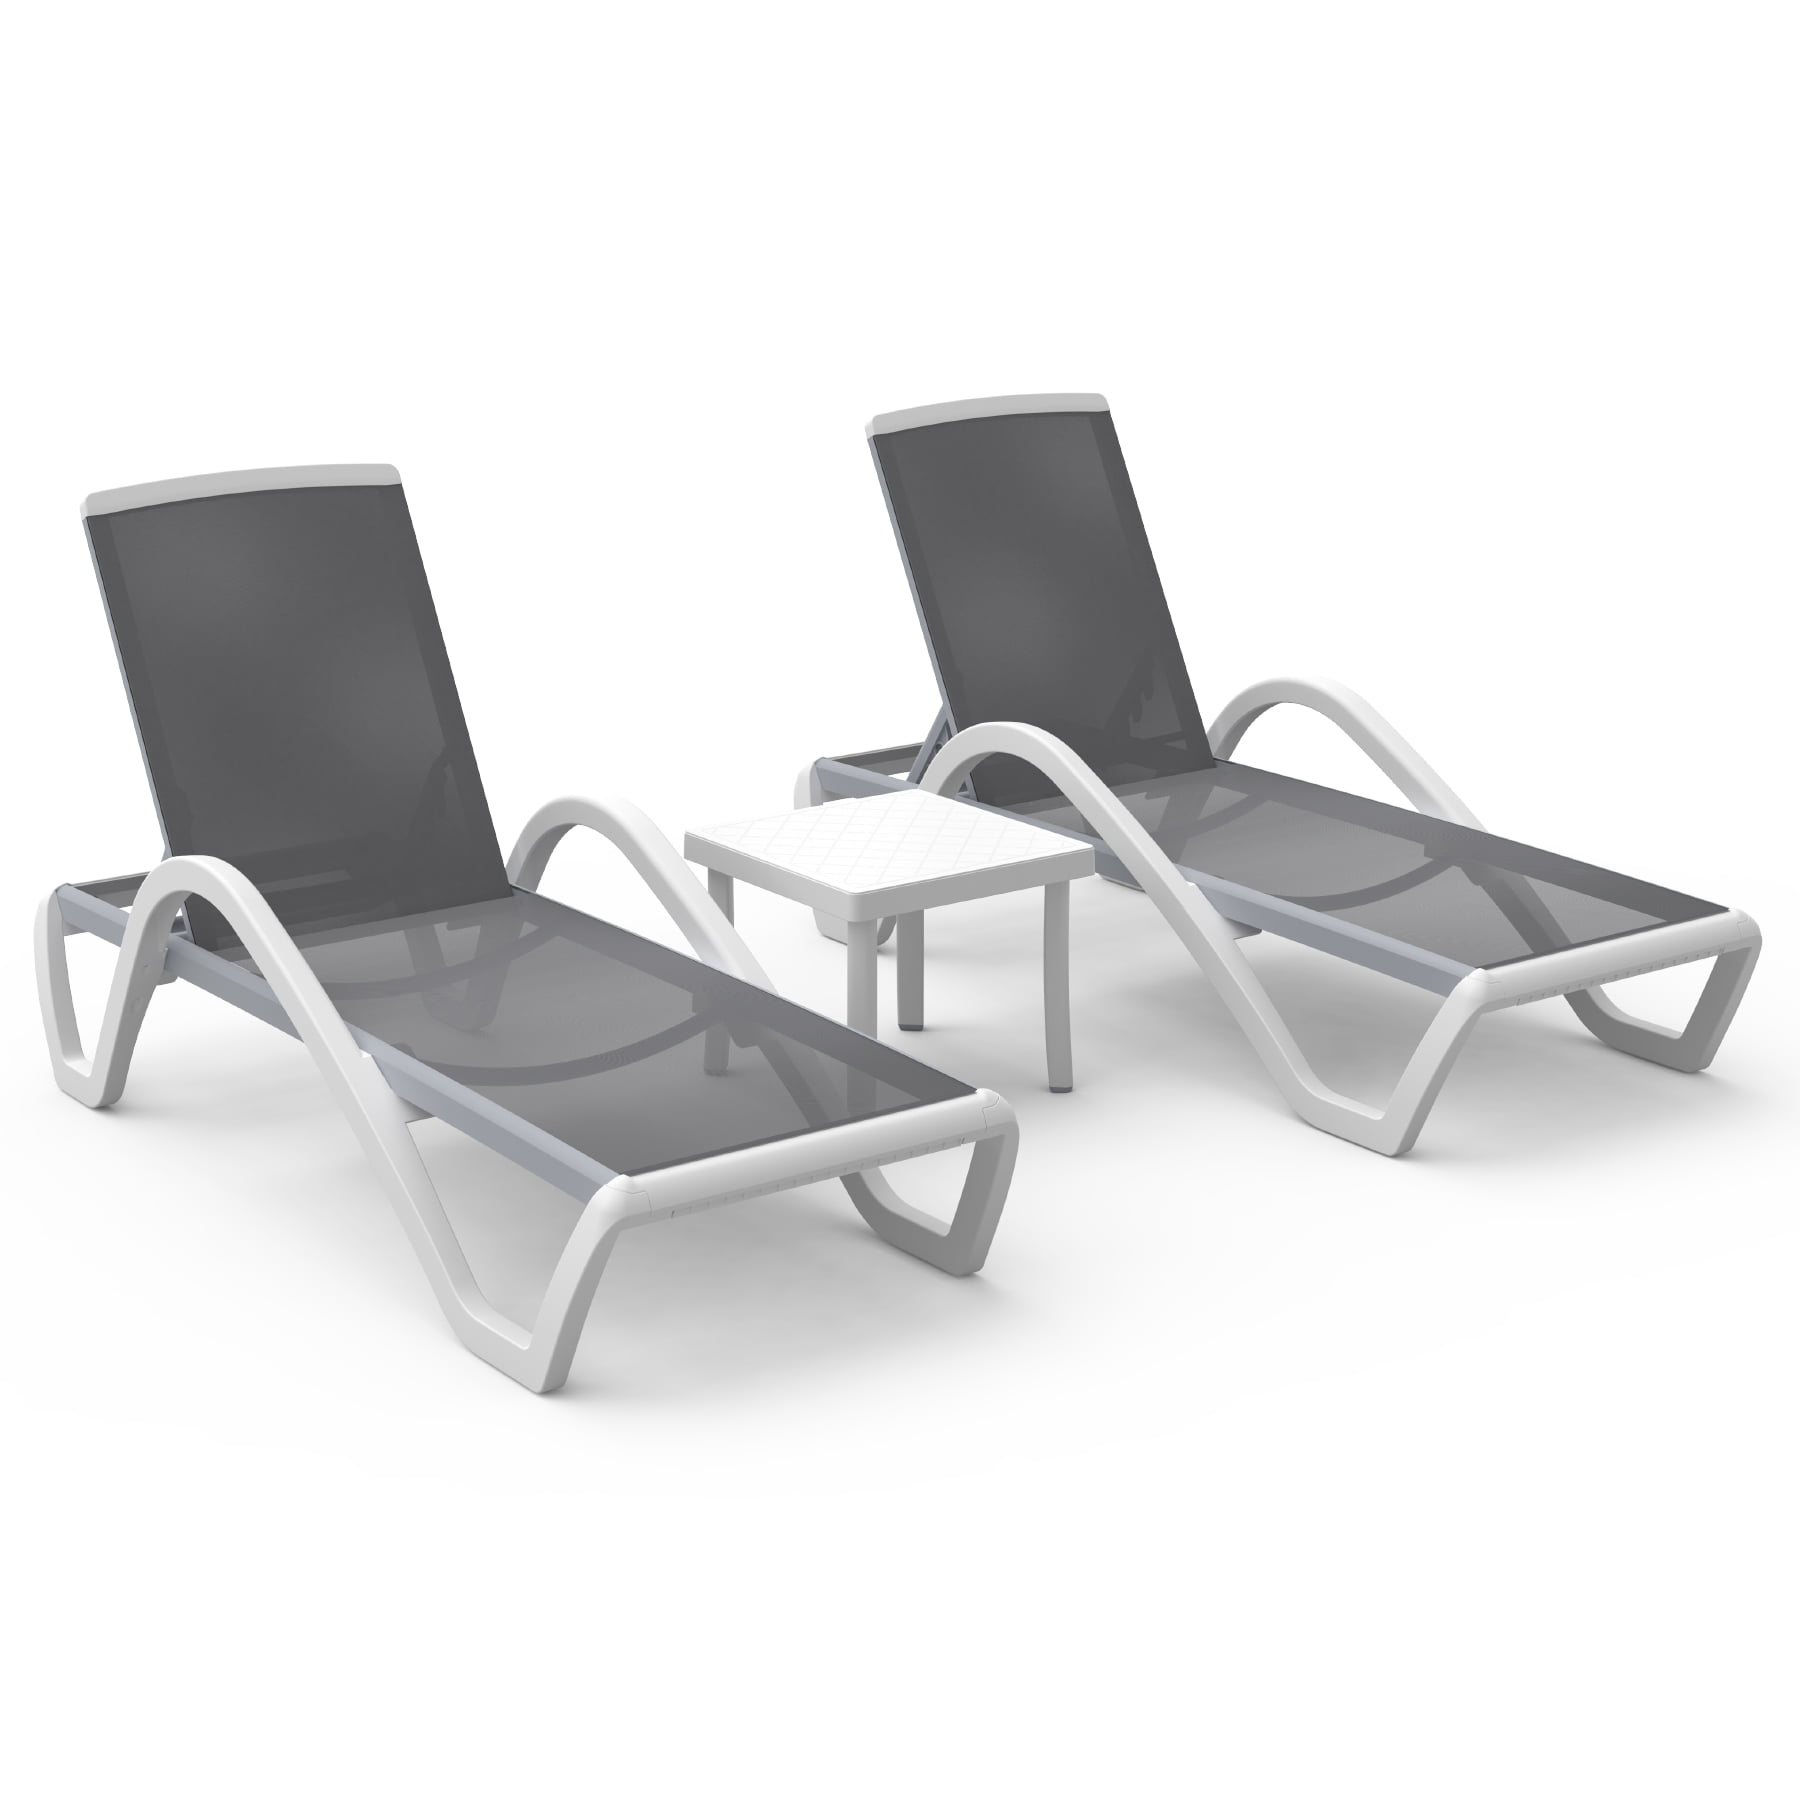 1 Blue Chair Domi Patio Chaise Lounge Outdoor Aluminum Polypropylene Chair with Adjustable Backrest,for Beach,Yard,Balcony,Poolside Sunbathing Chair 